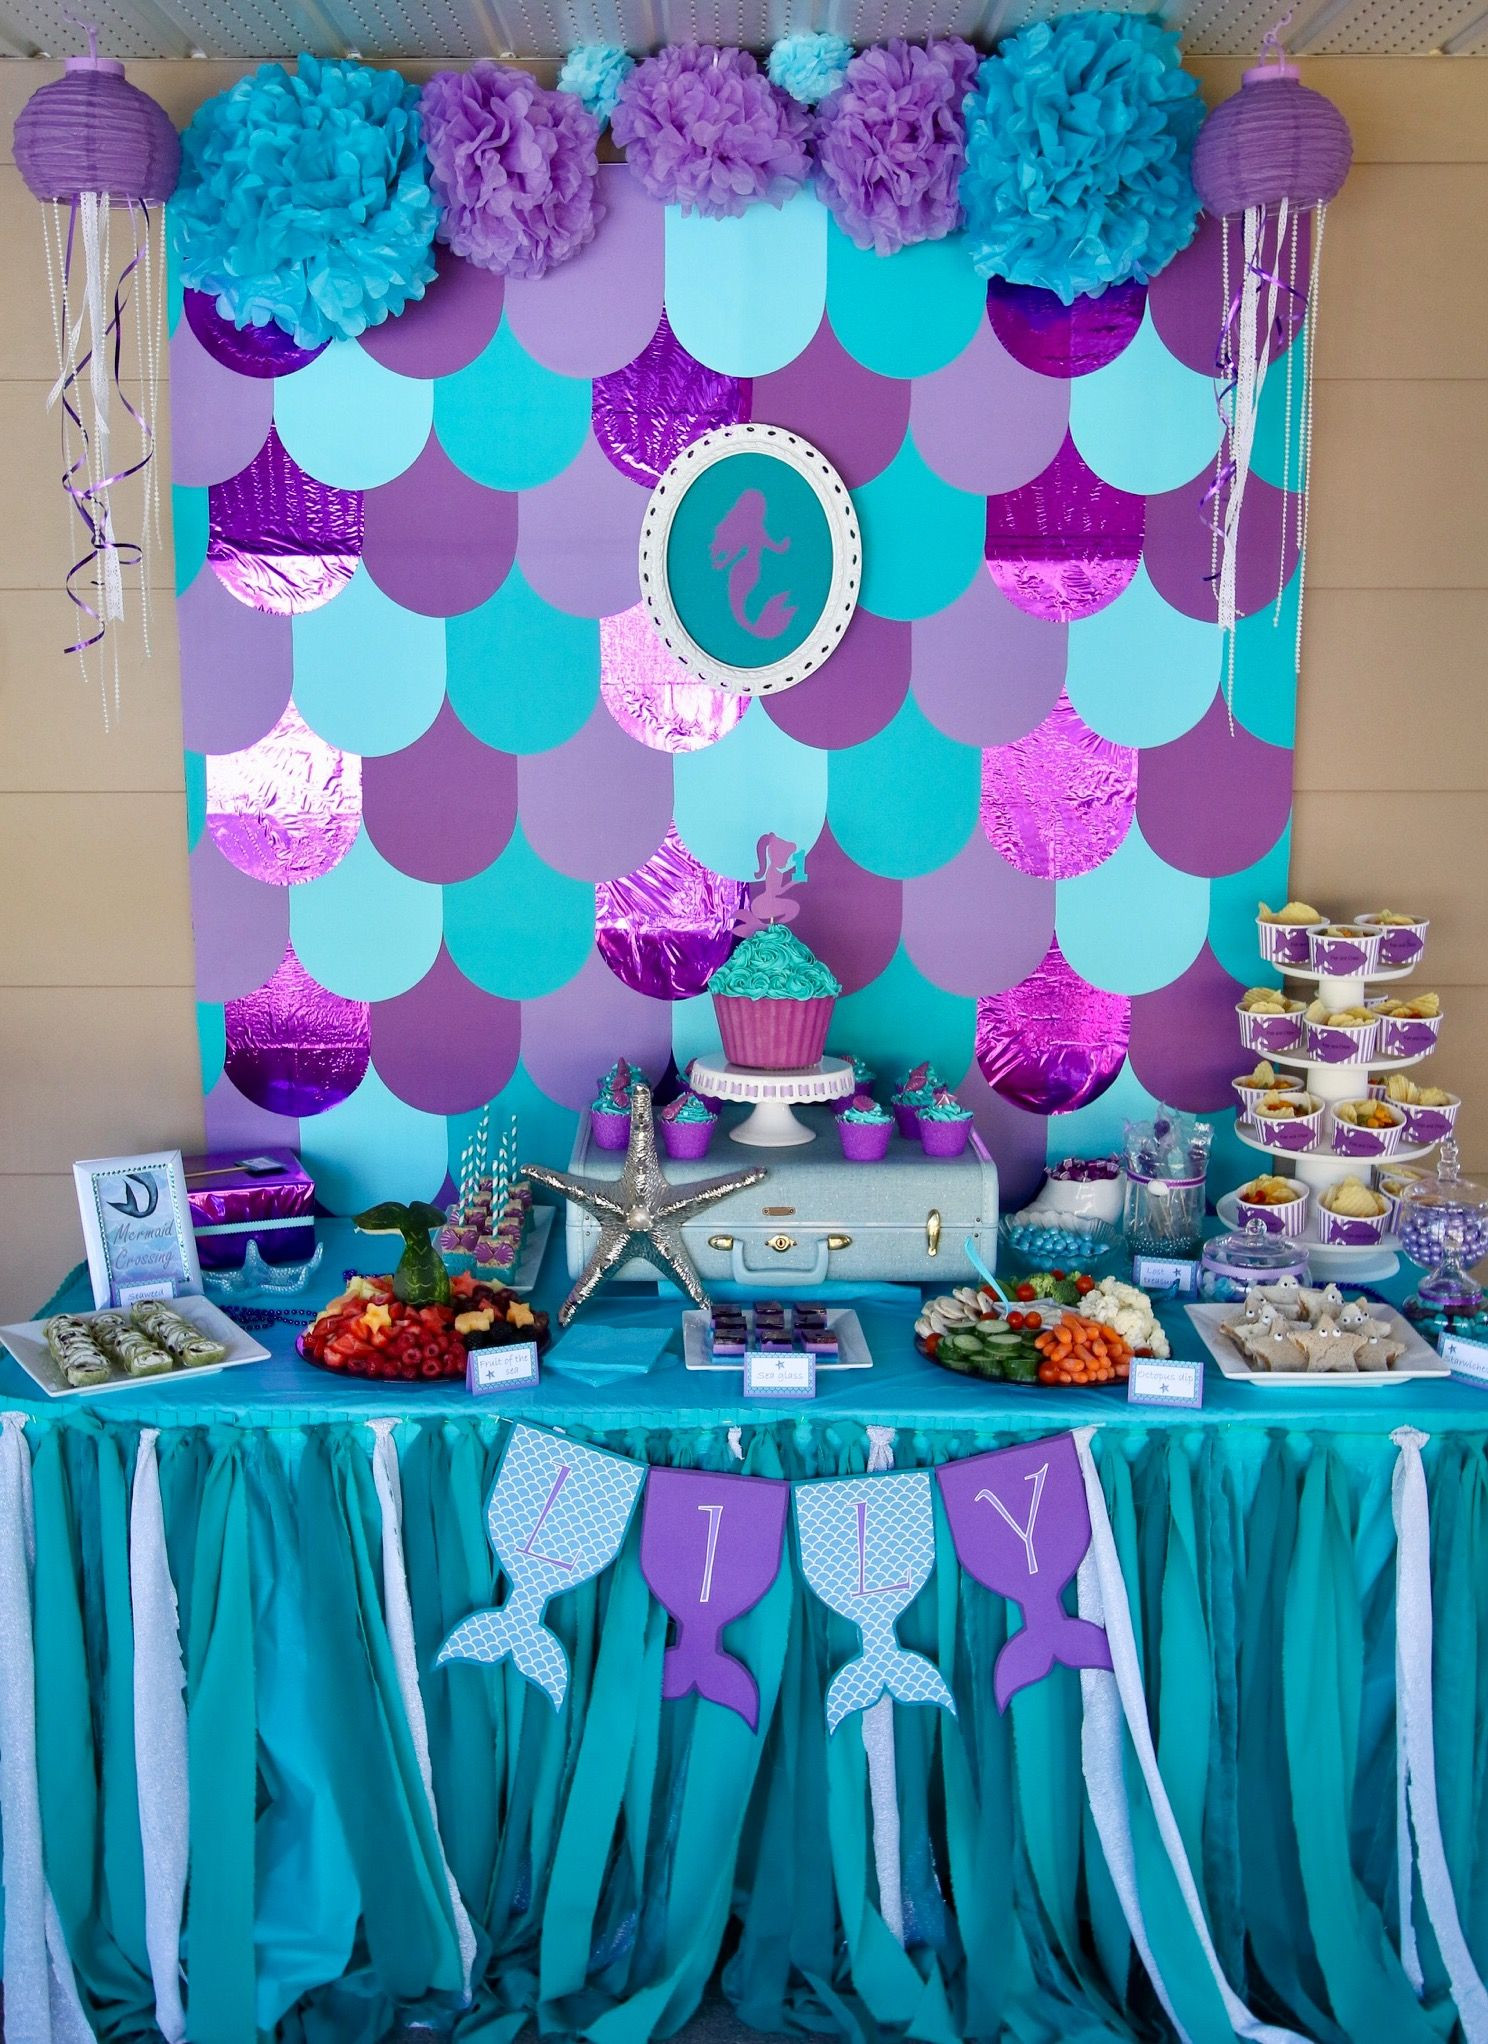 Little Mermaid Birthday Party Decorations
 Mermaid party table decorations Under the sea birthday